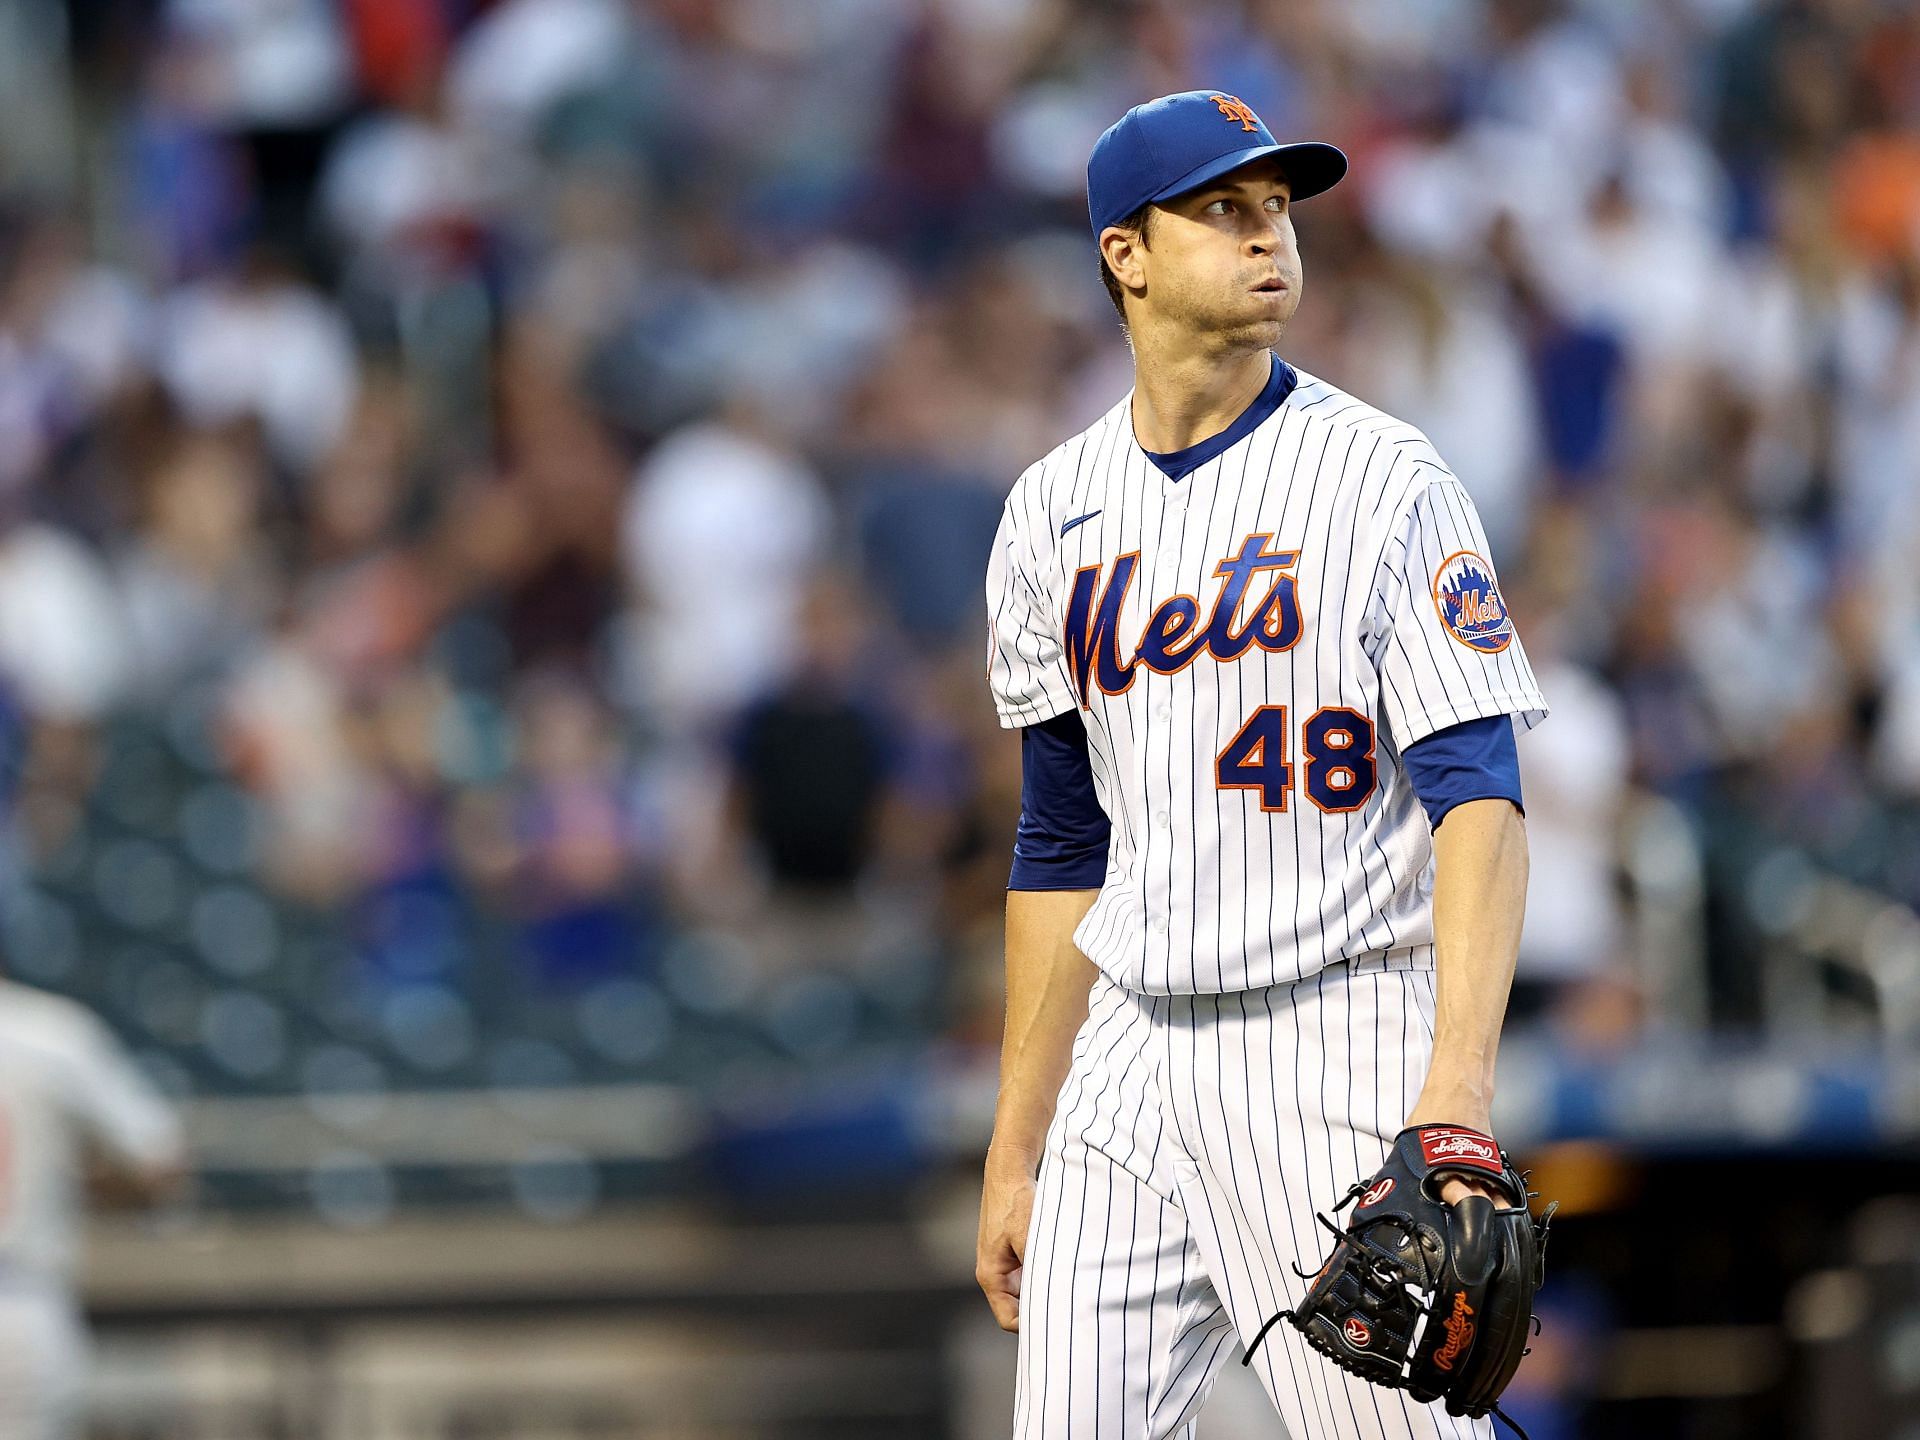 The New York Mets will be without Jacob DeGrom for a while